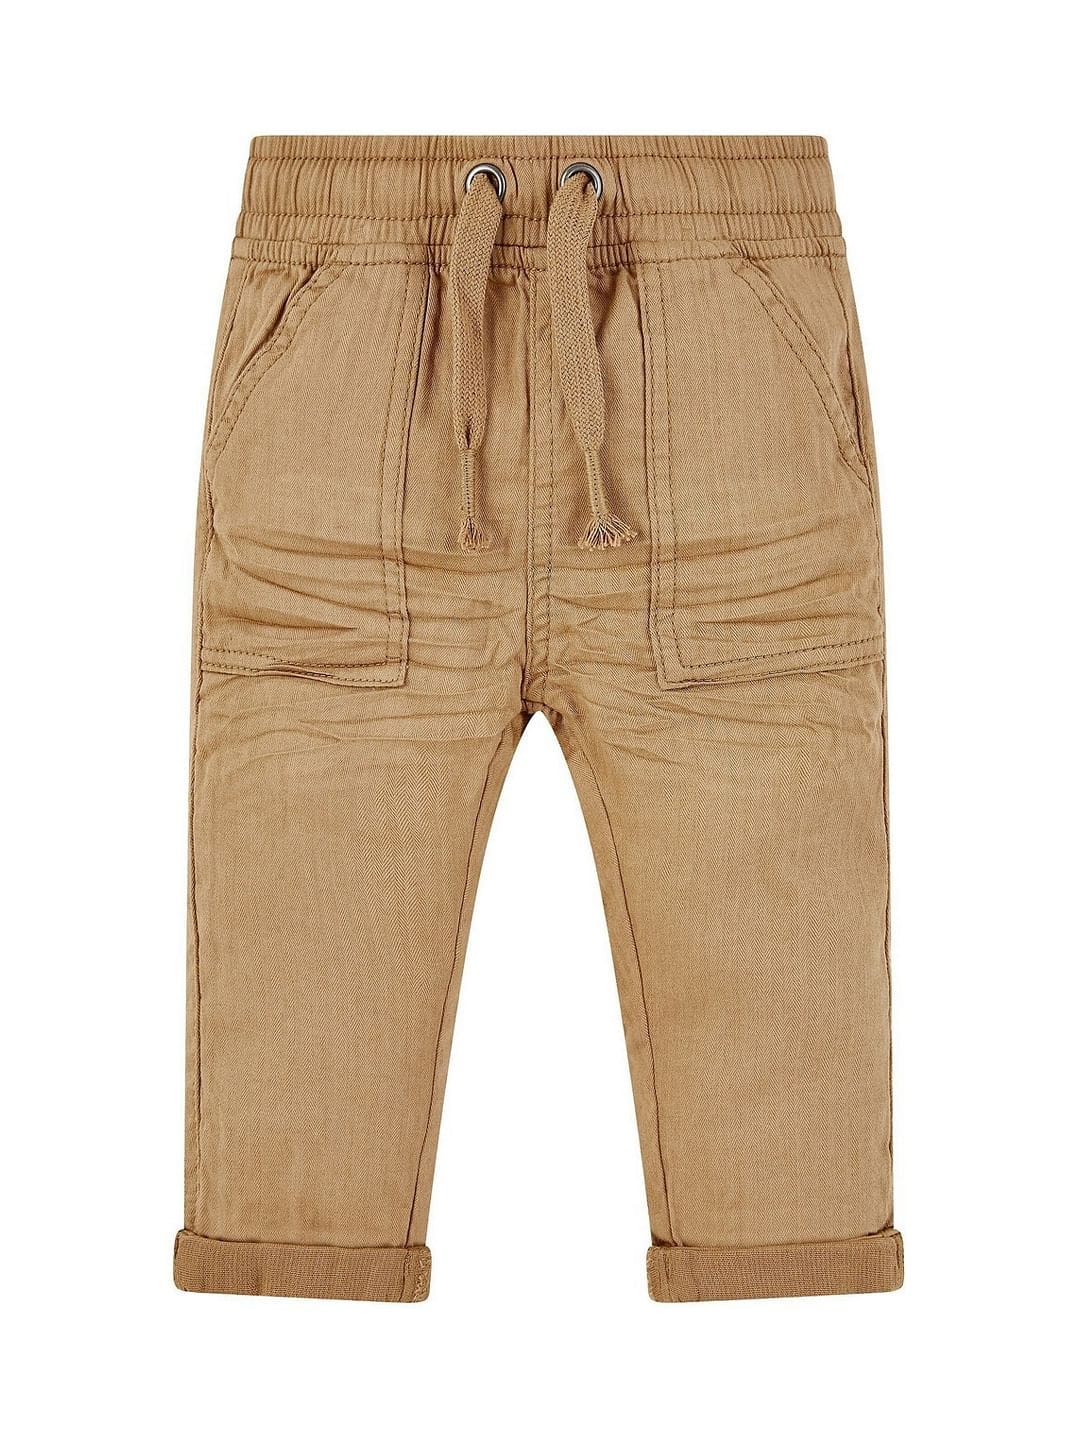 Mothercare | Tan Woven Trousers 0